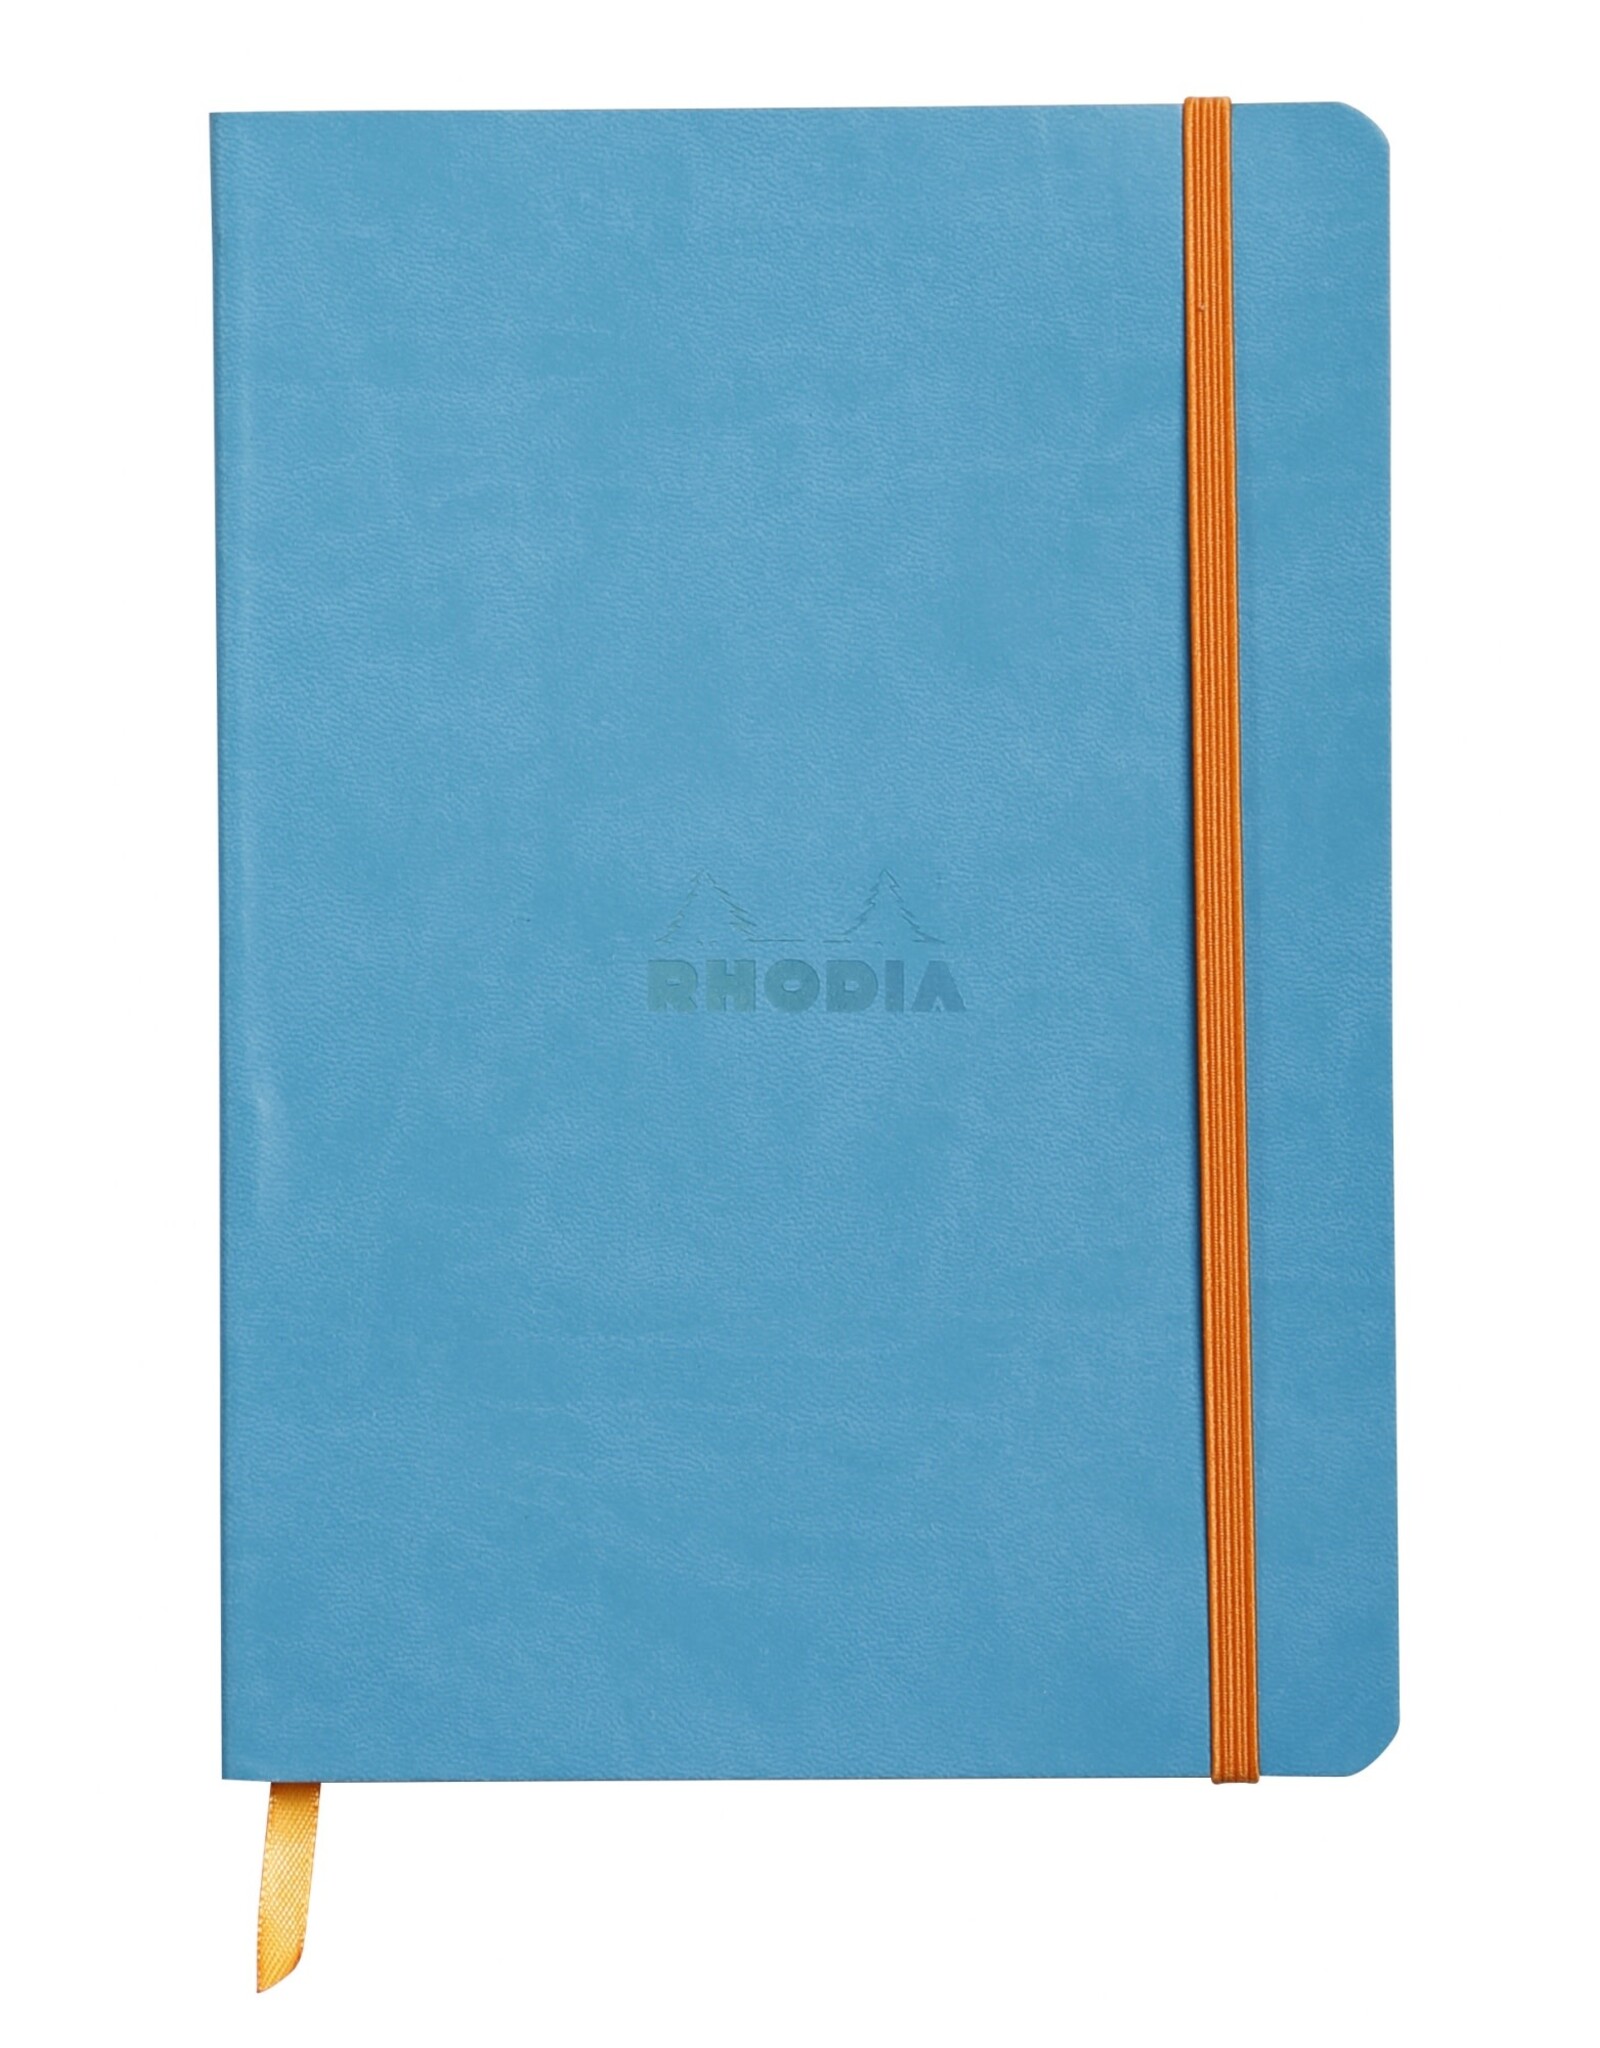 Rhodia Rhodia Rhodiarama SoftCover Notebook, 80 Lined Sheets, 6" x 8 1/4", Turquoise